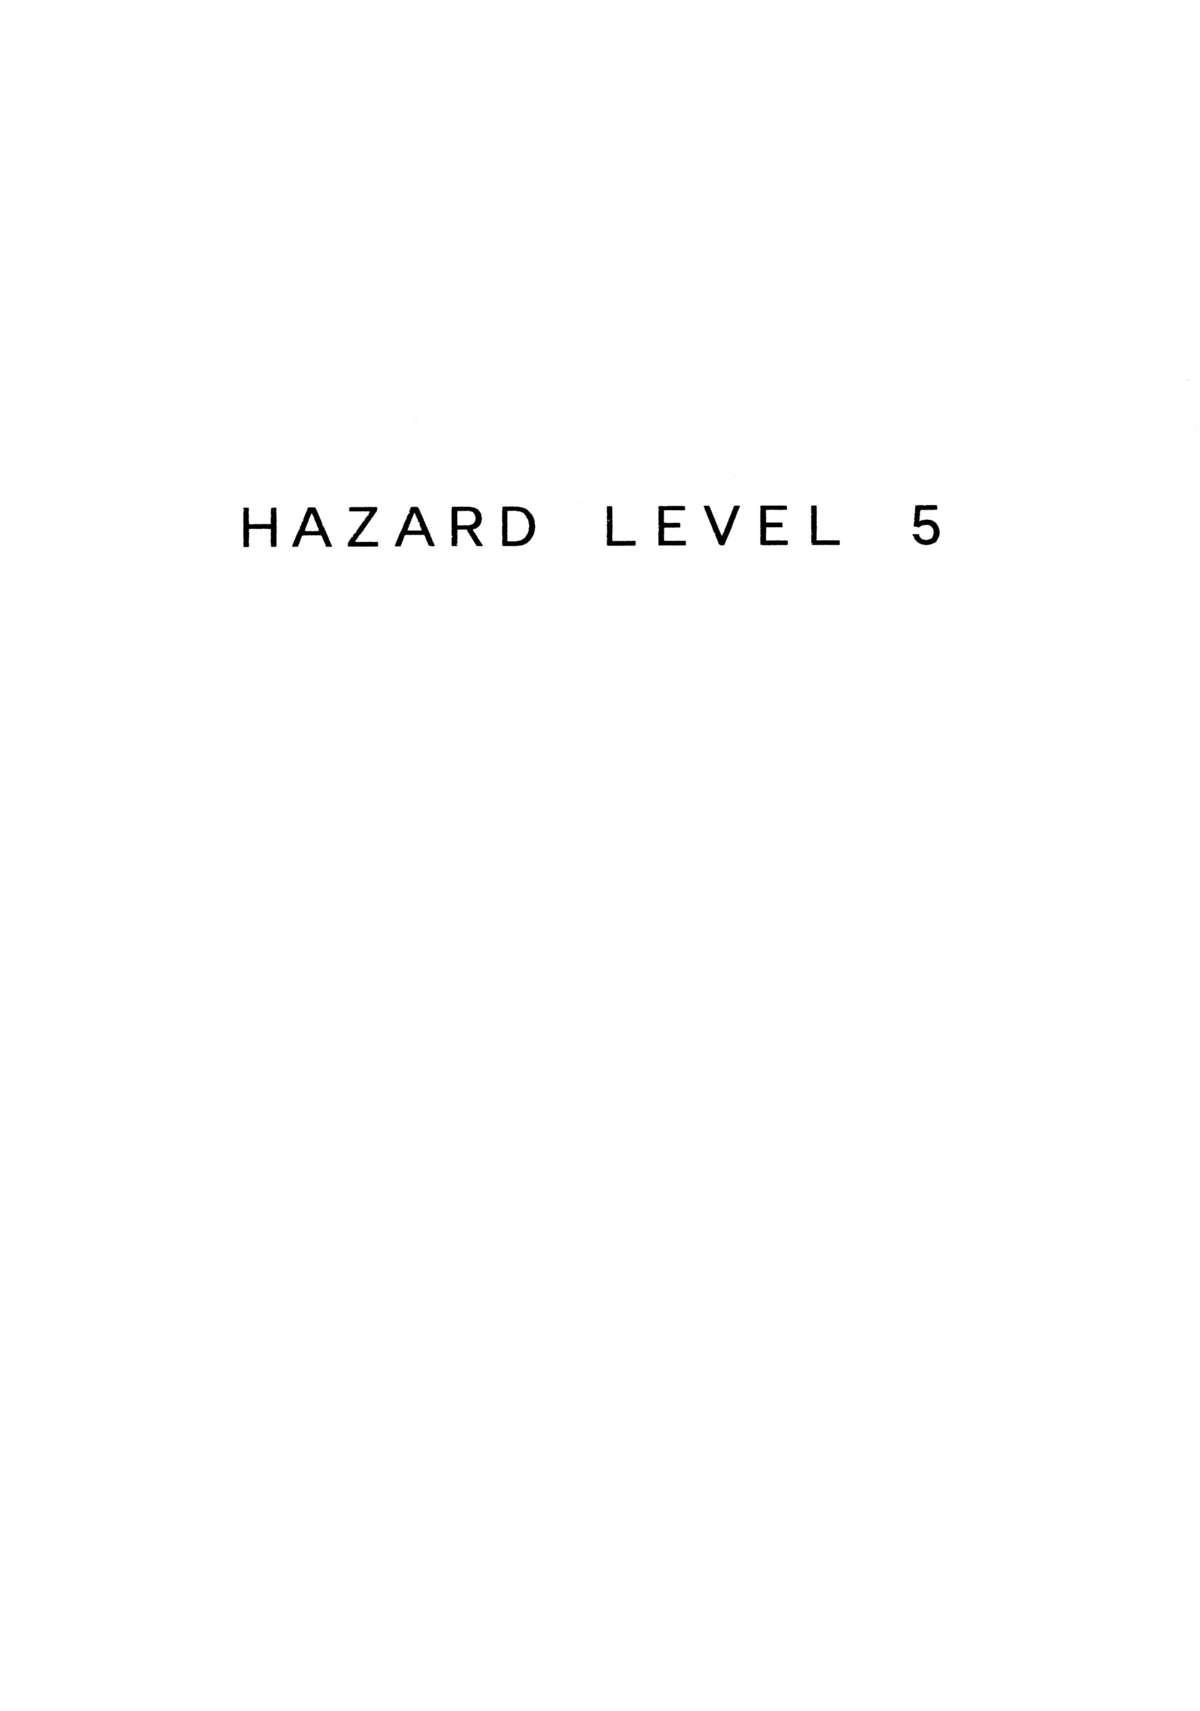 Blow Job Movies HAZARD LEVEL 5 - Resident evil Roughsex - Page 2